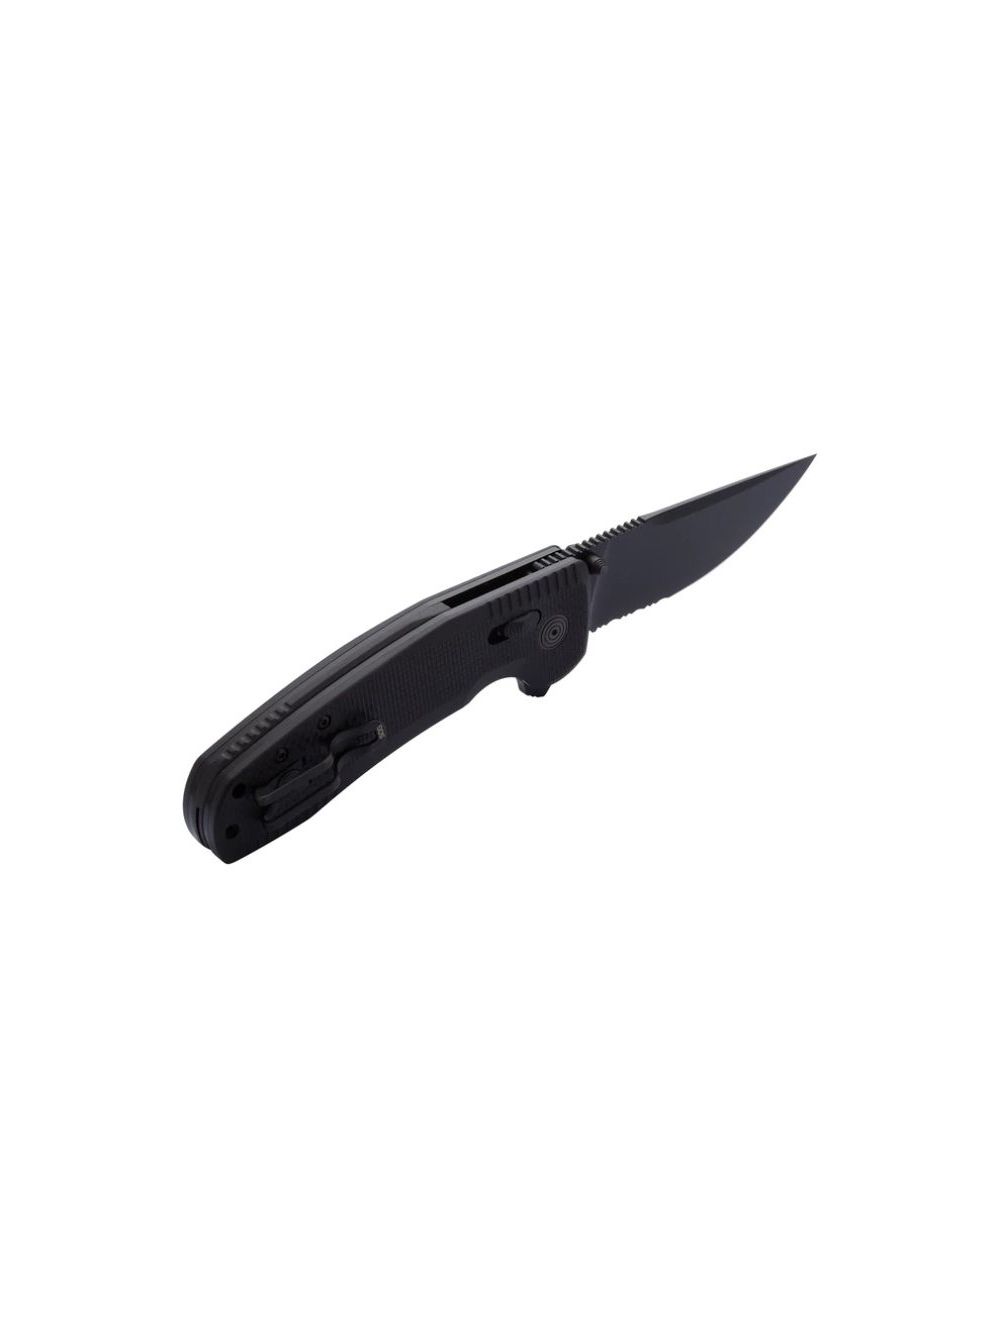 SOG-TAC XR Blackout partially Serrated